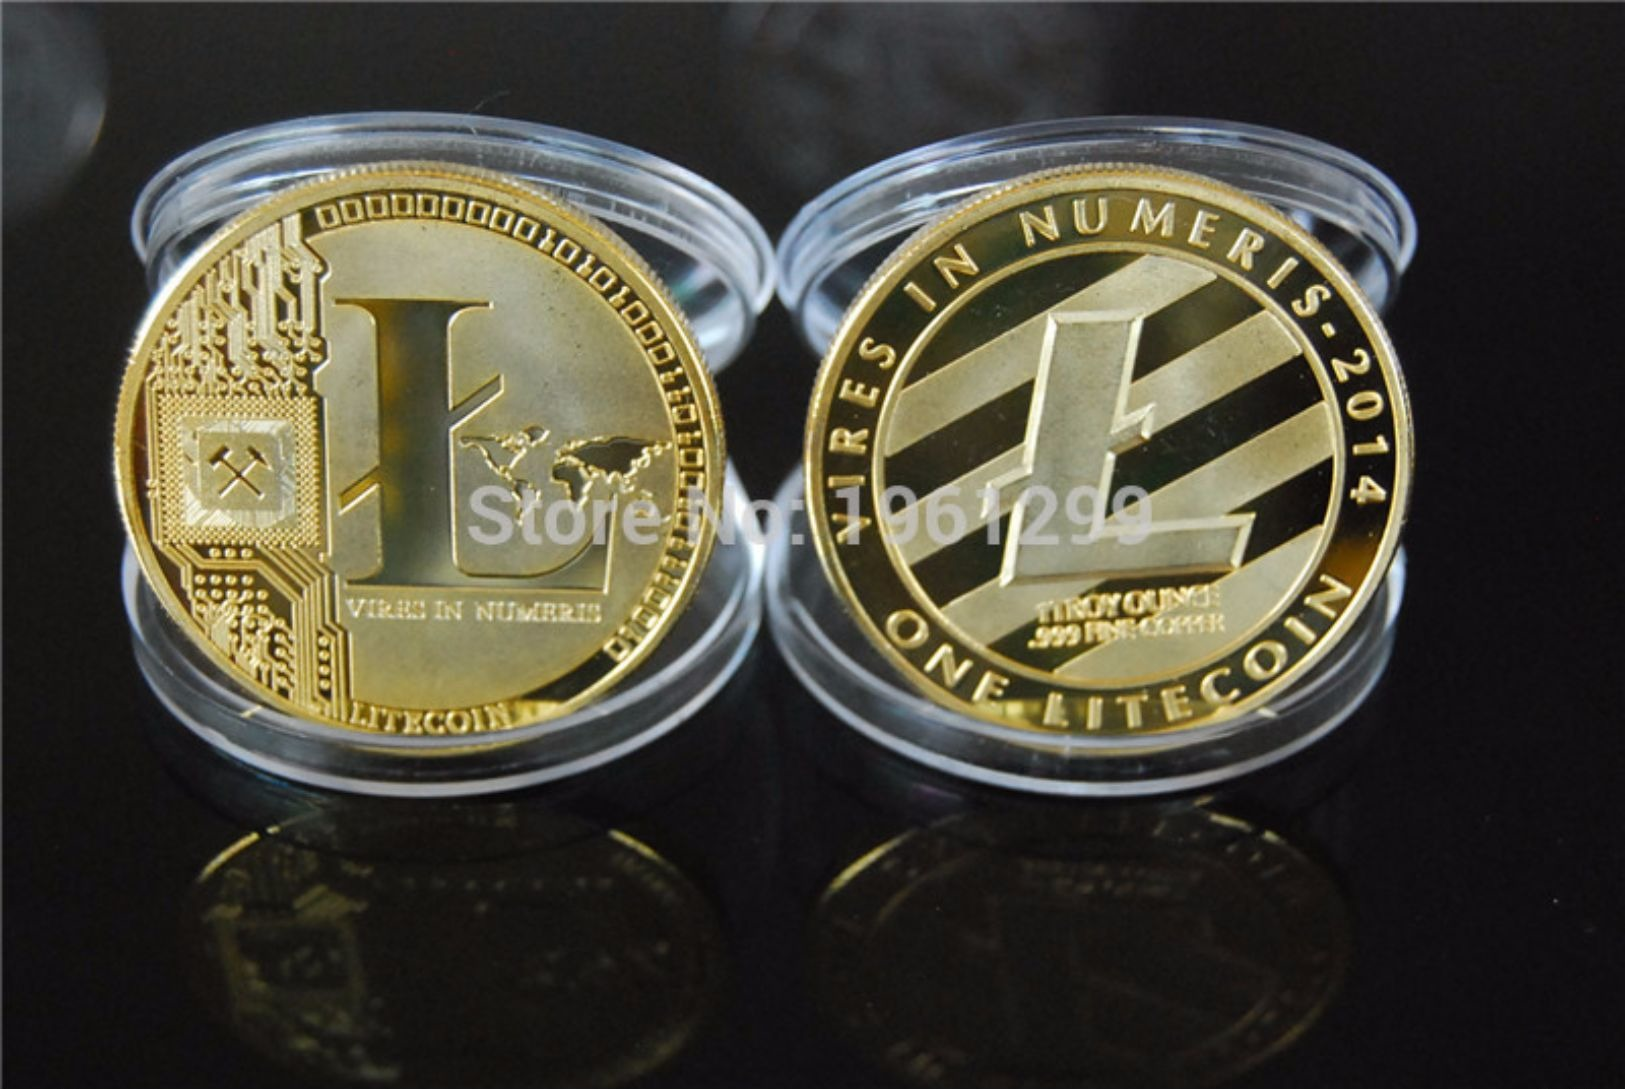 25 Litecoin Coins Vires In Numeris Commemorative Coin Collection Gold Plated - Other & Unclassified